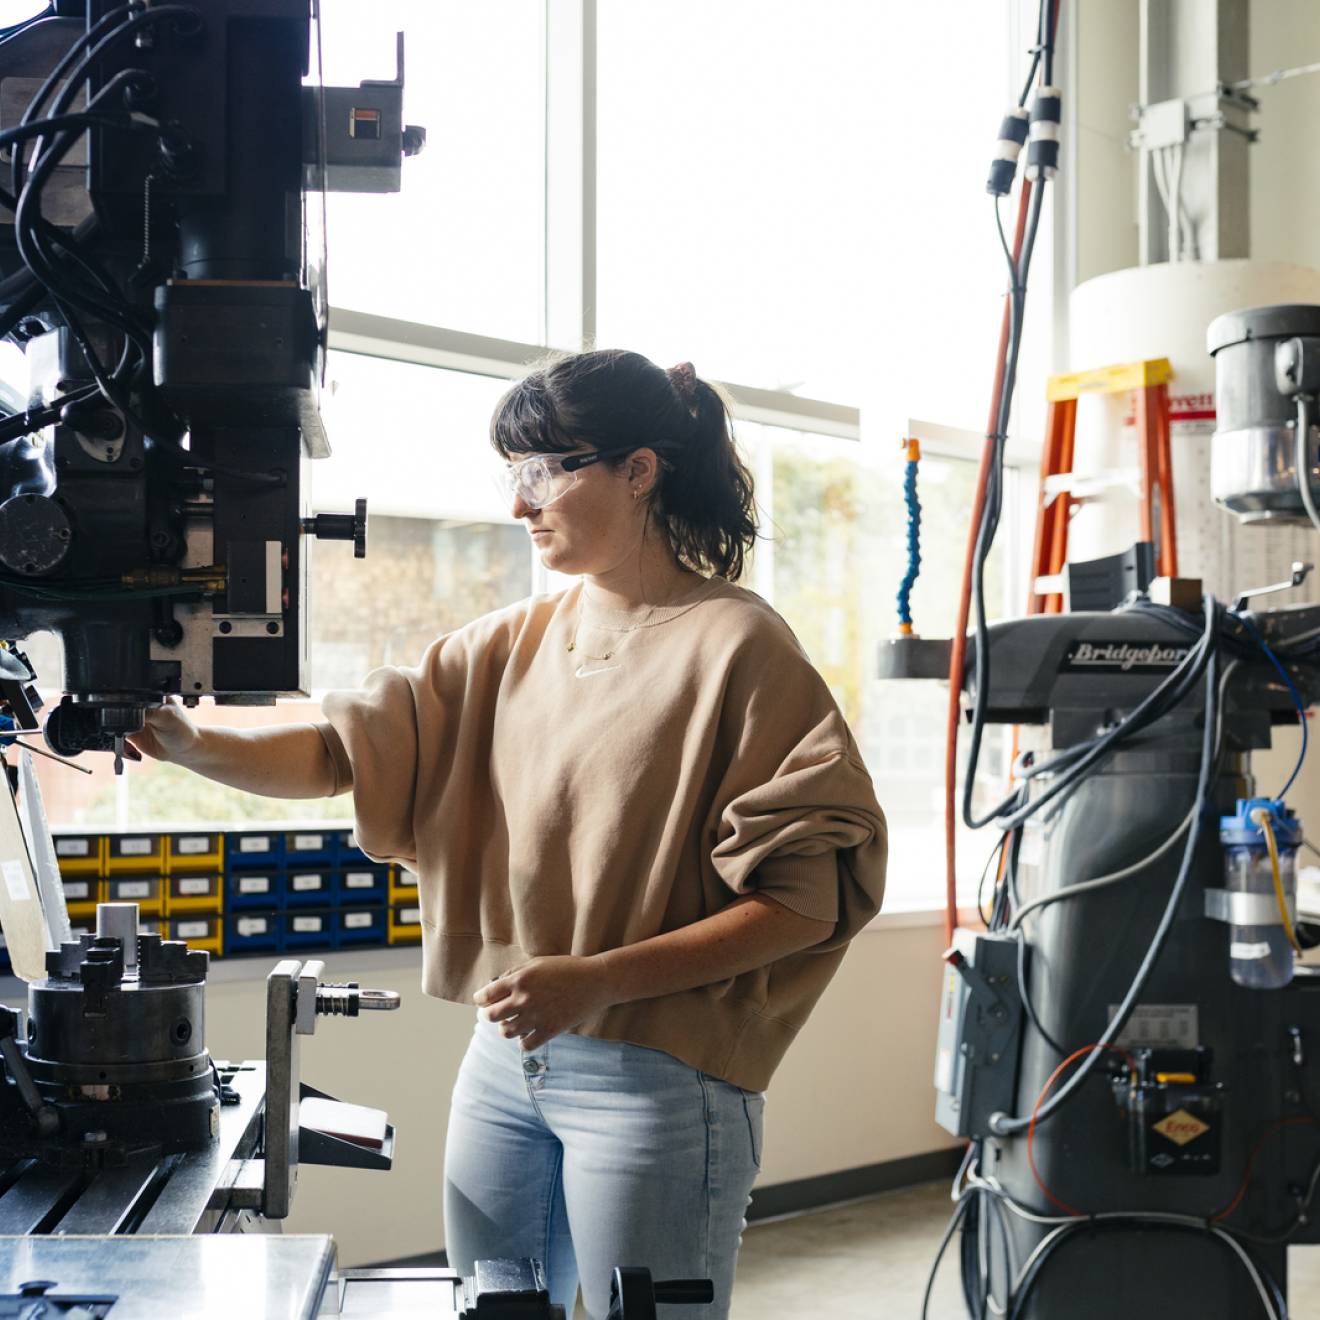 A woman in jeans and a brown sweater wearing safety glasses uses a large machine in a lab lit by natural light from a large wall of windows